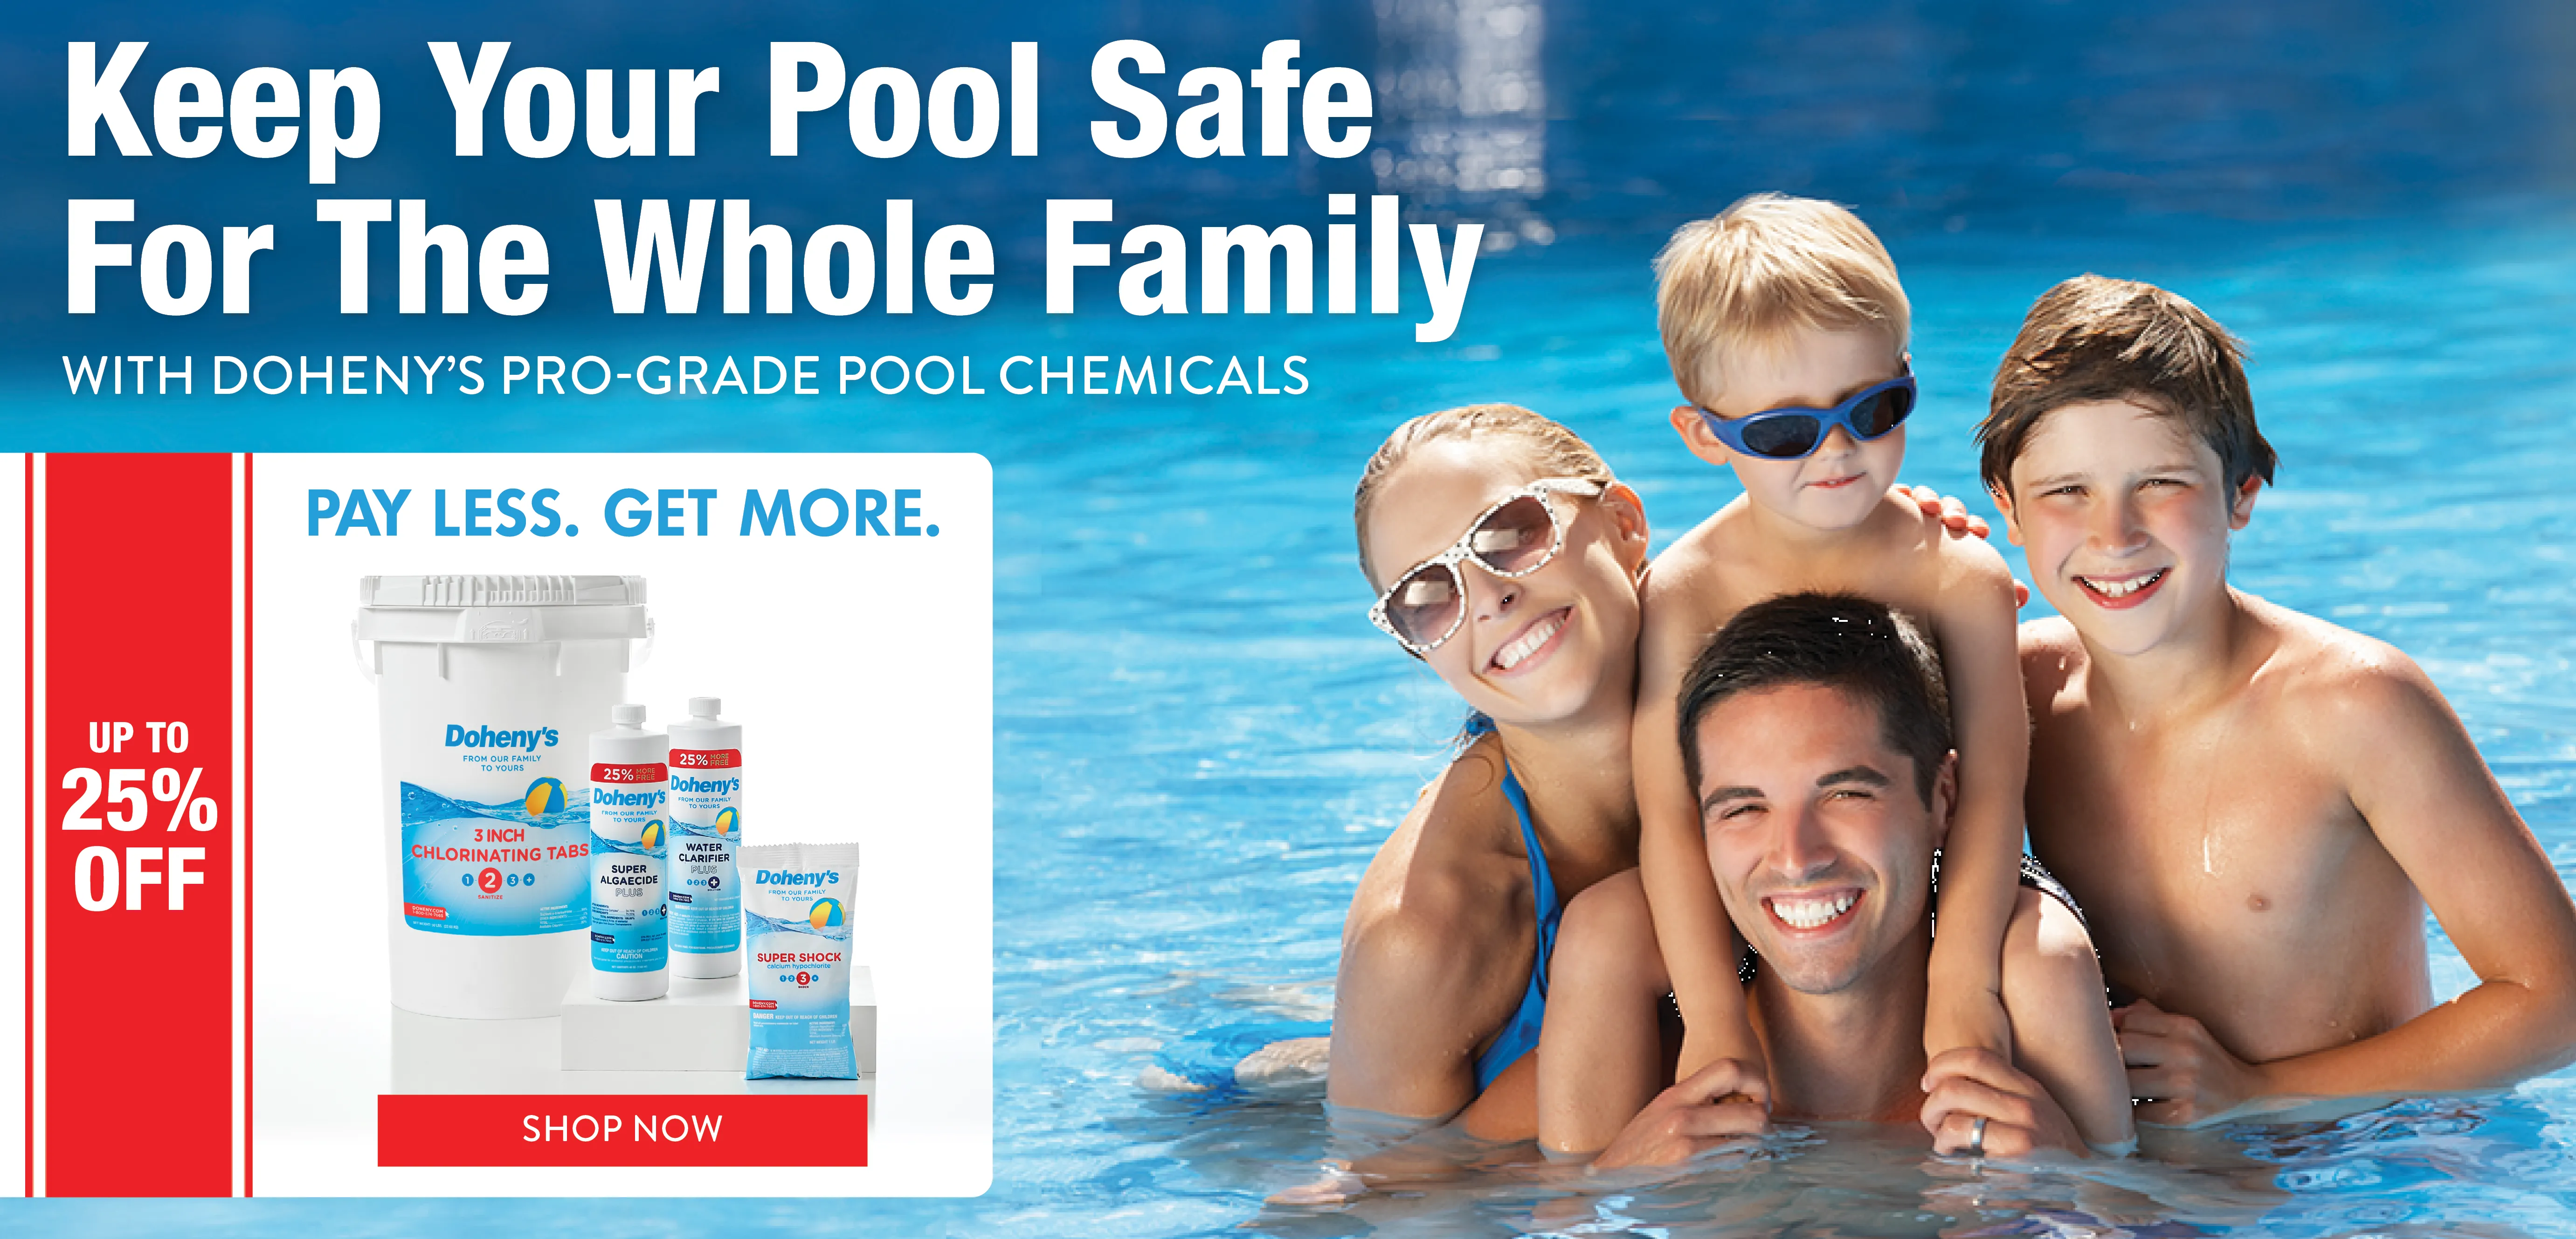 Keep Your Pool Safe for the Whole Family